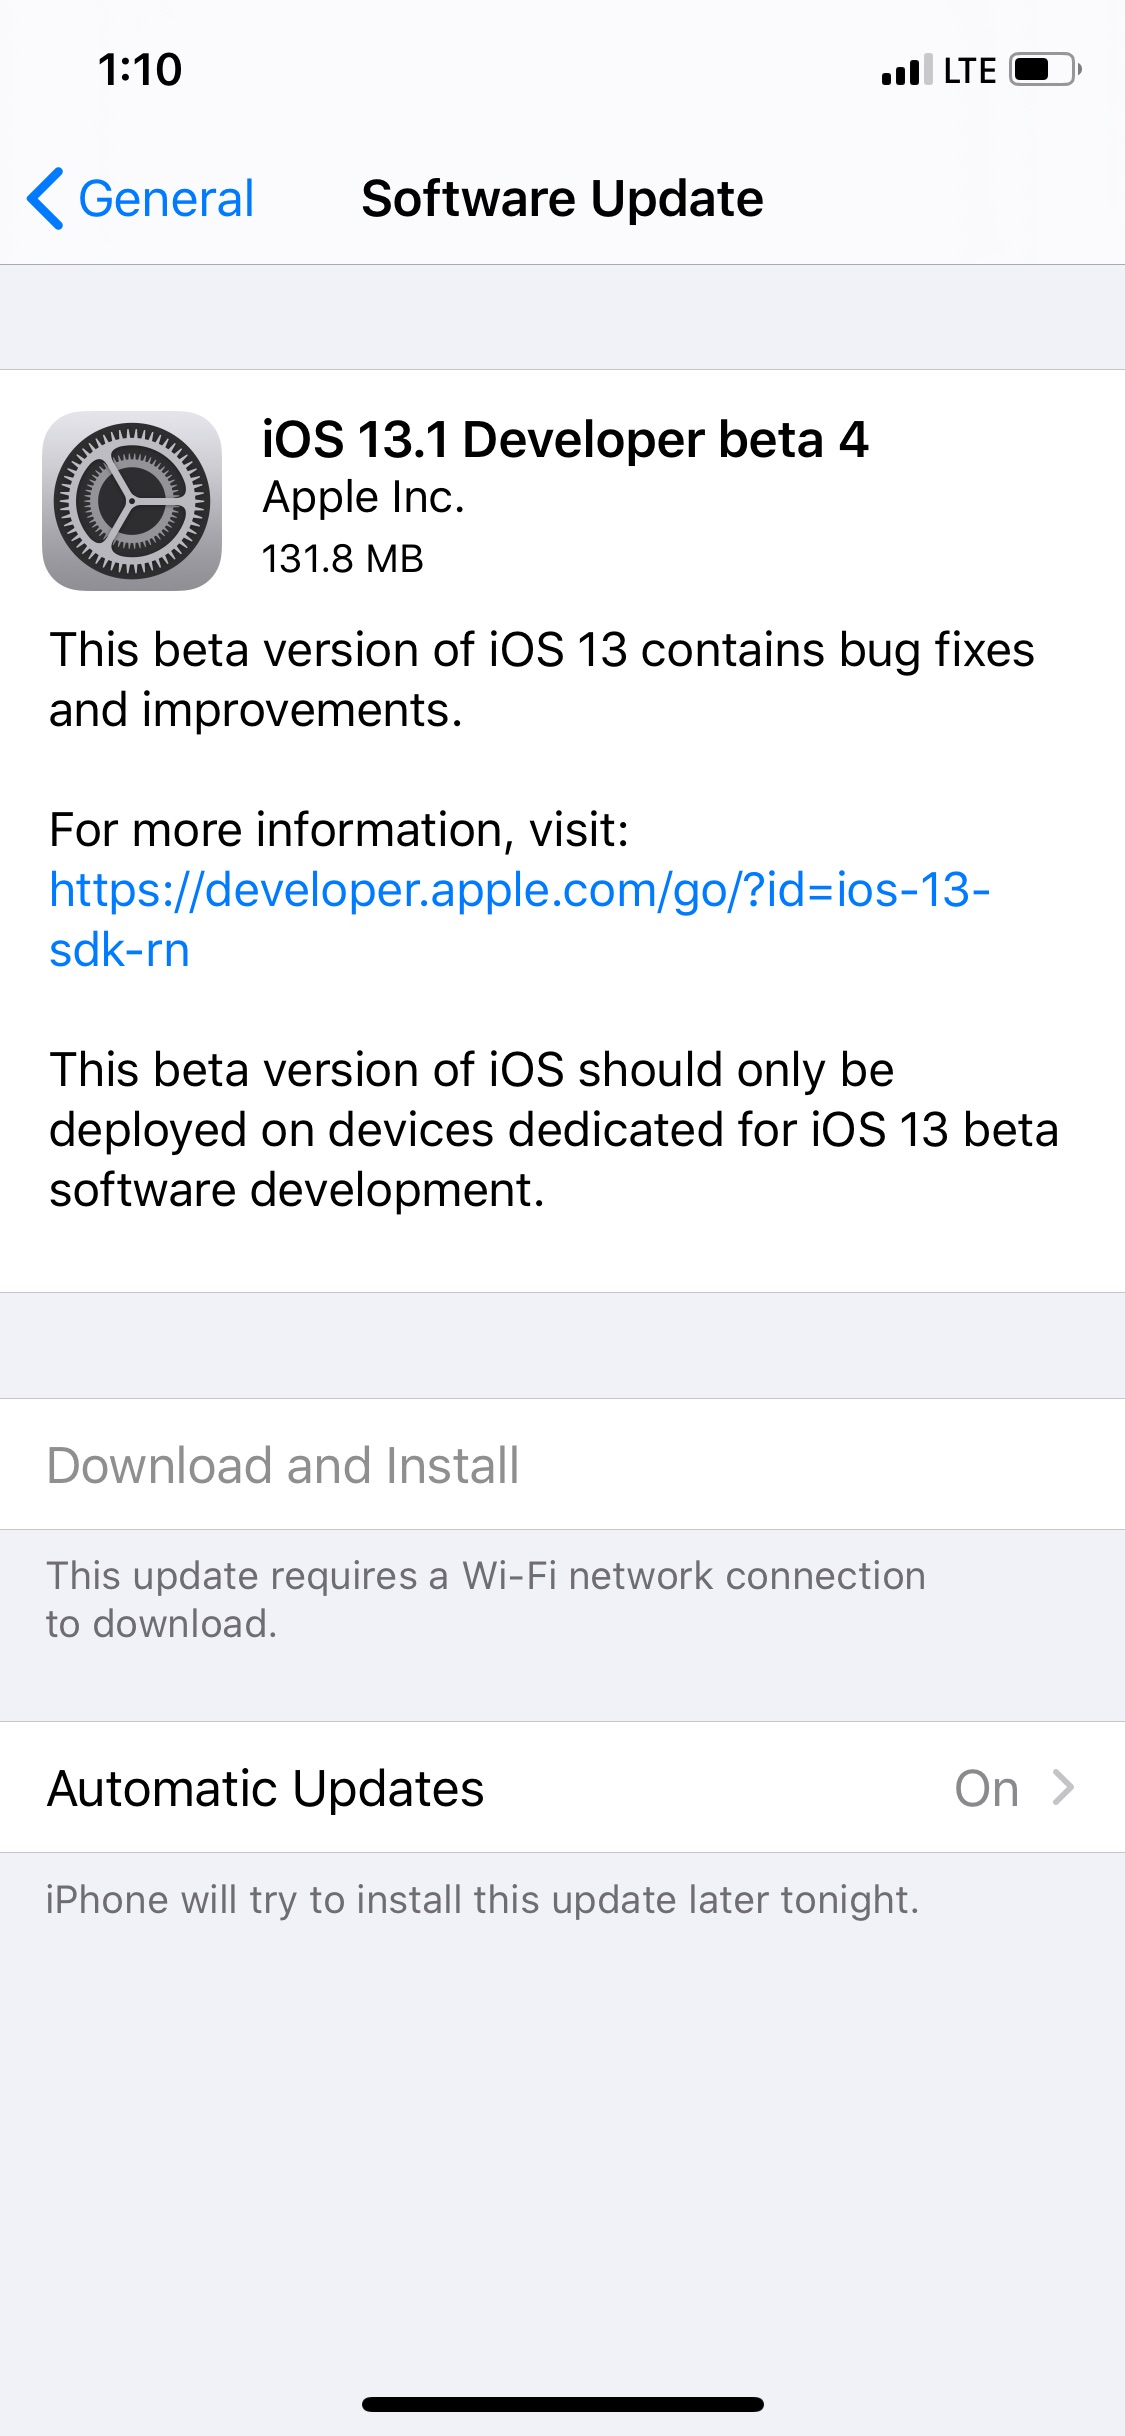 Apple Releases iOS 13.1 Beta 4 to Developers [Download]